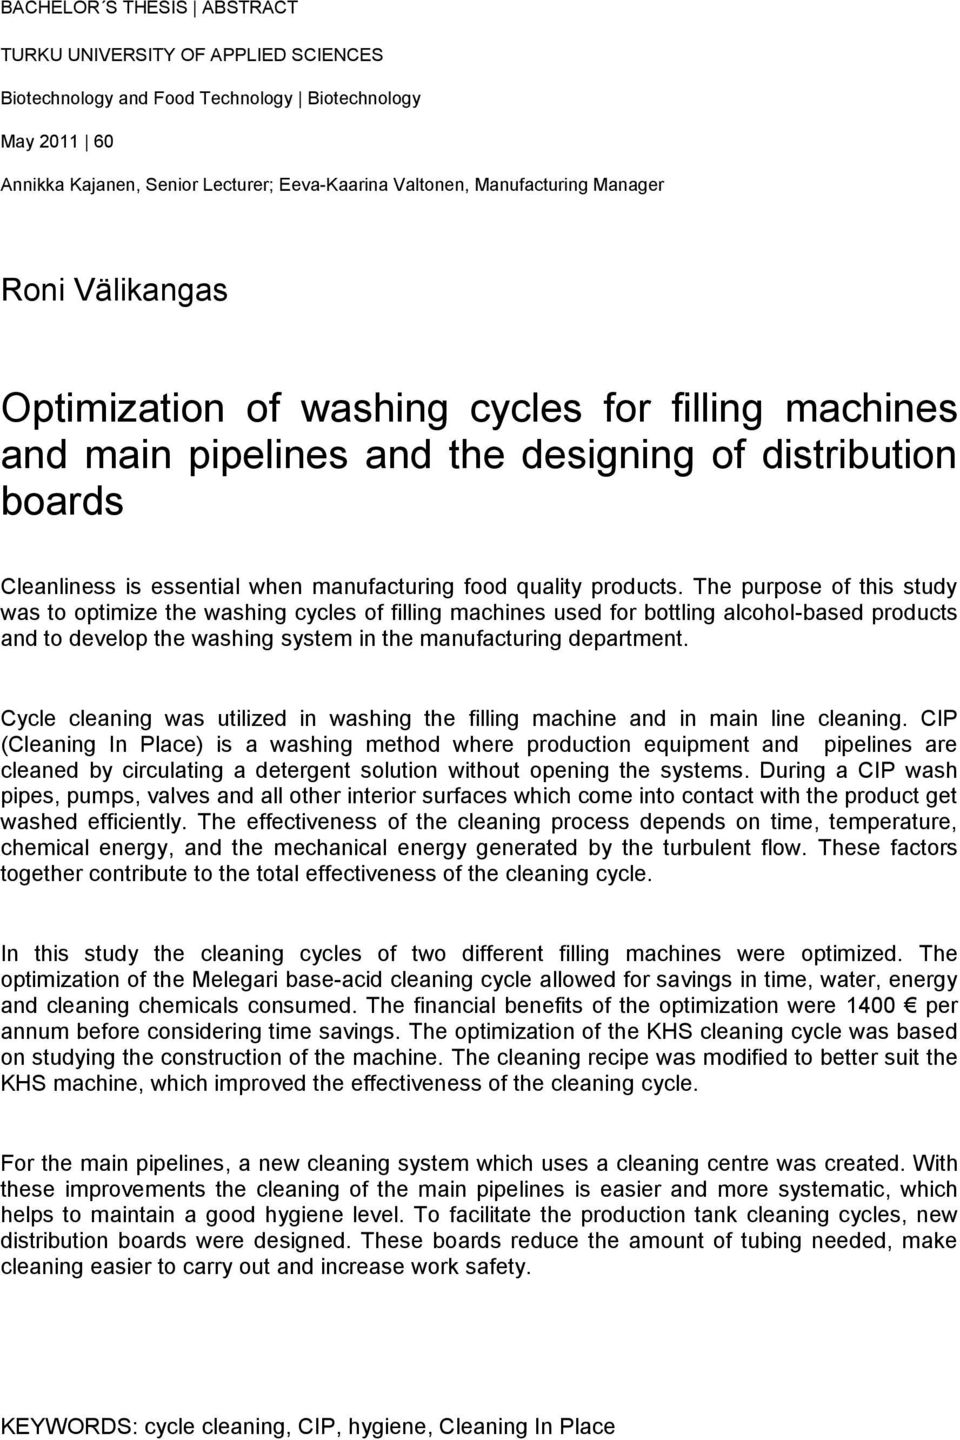 products. The purpose of this study was to optimize the washing cycles of filling machines used for bottling alcohol-based products and to develop the washing system in the manufacturing department.